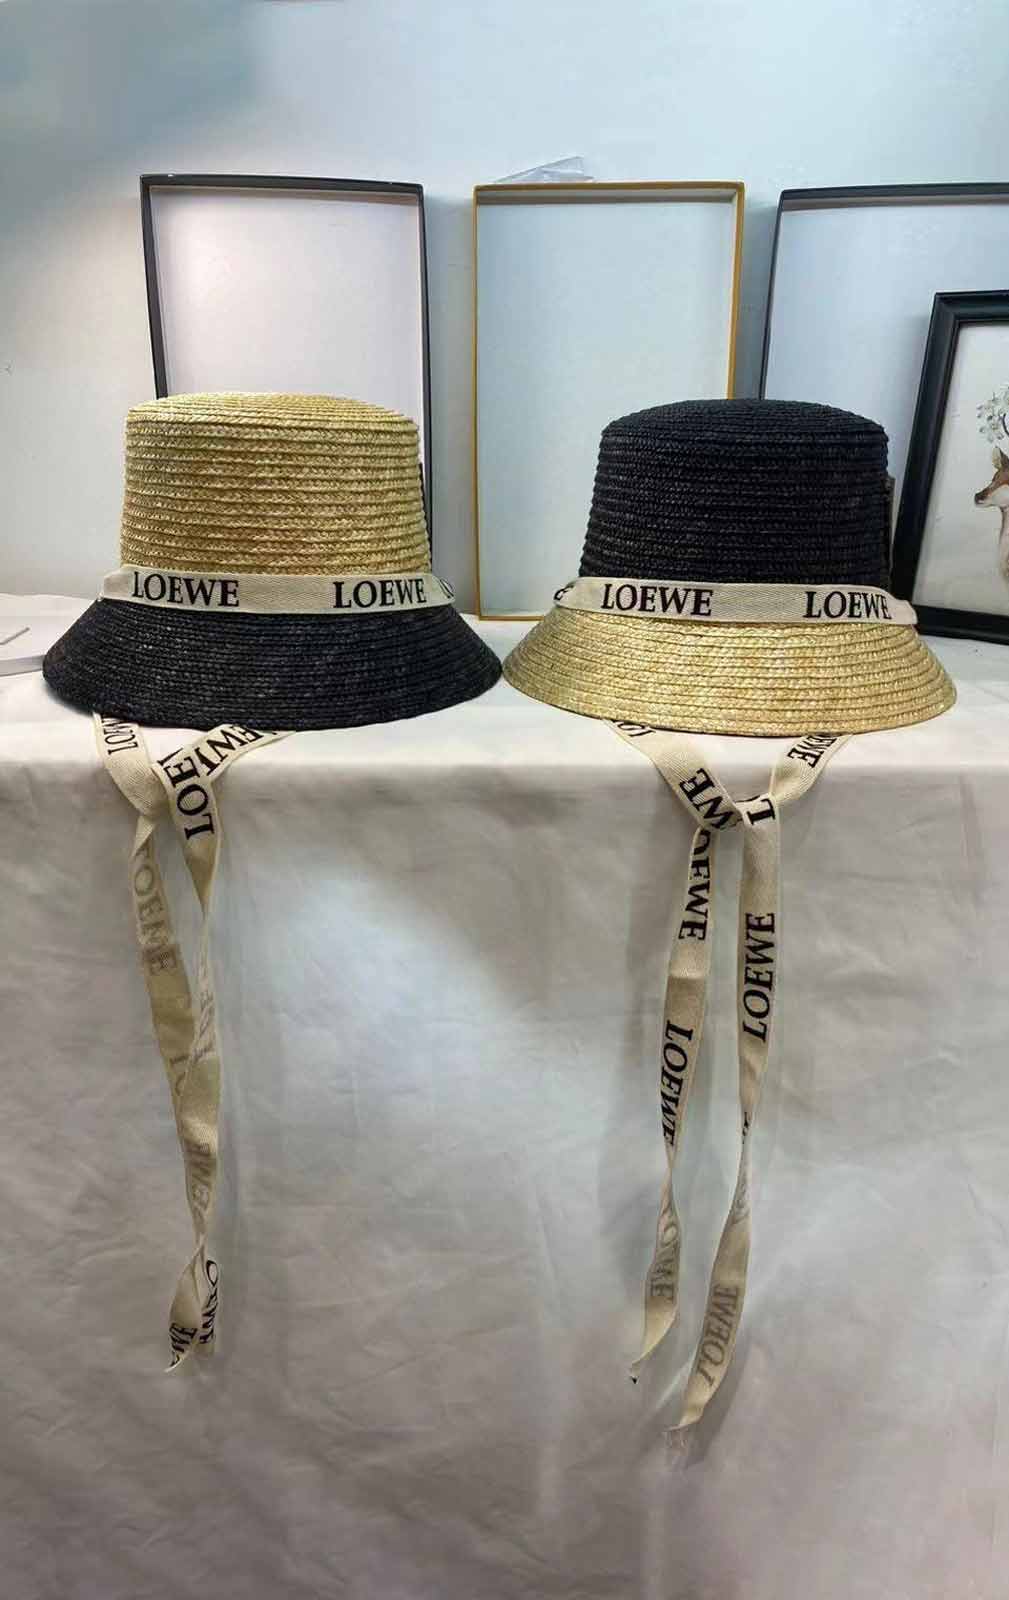 Look stylish and stay cool in the sun with this Women's Straw Boater Hat. Perfect for beach days, outdoor events and more.